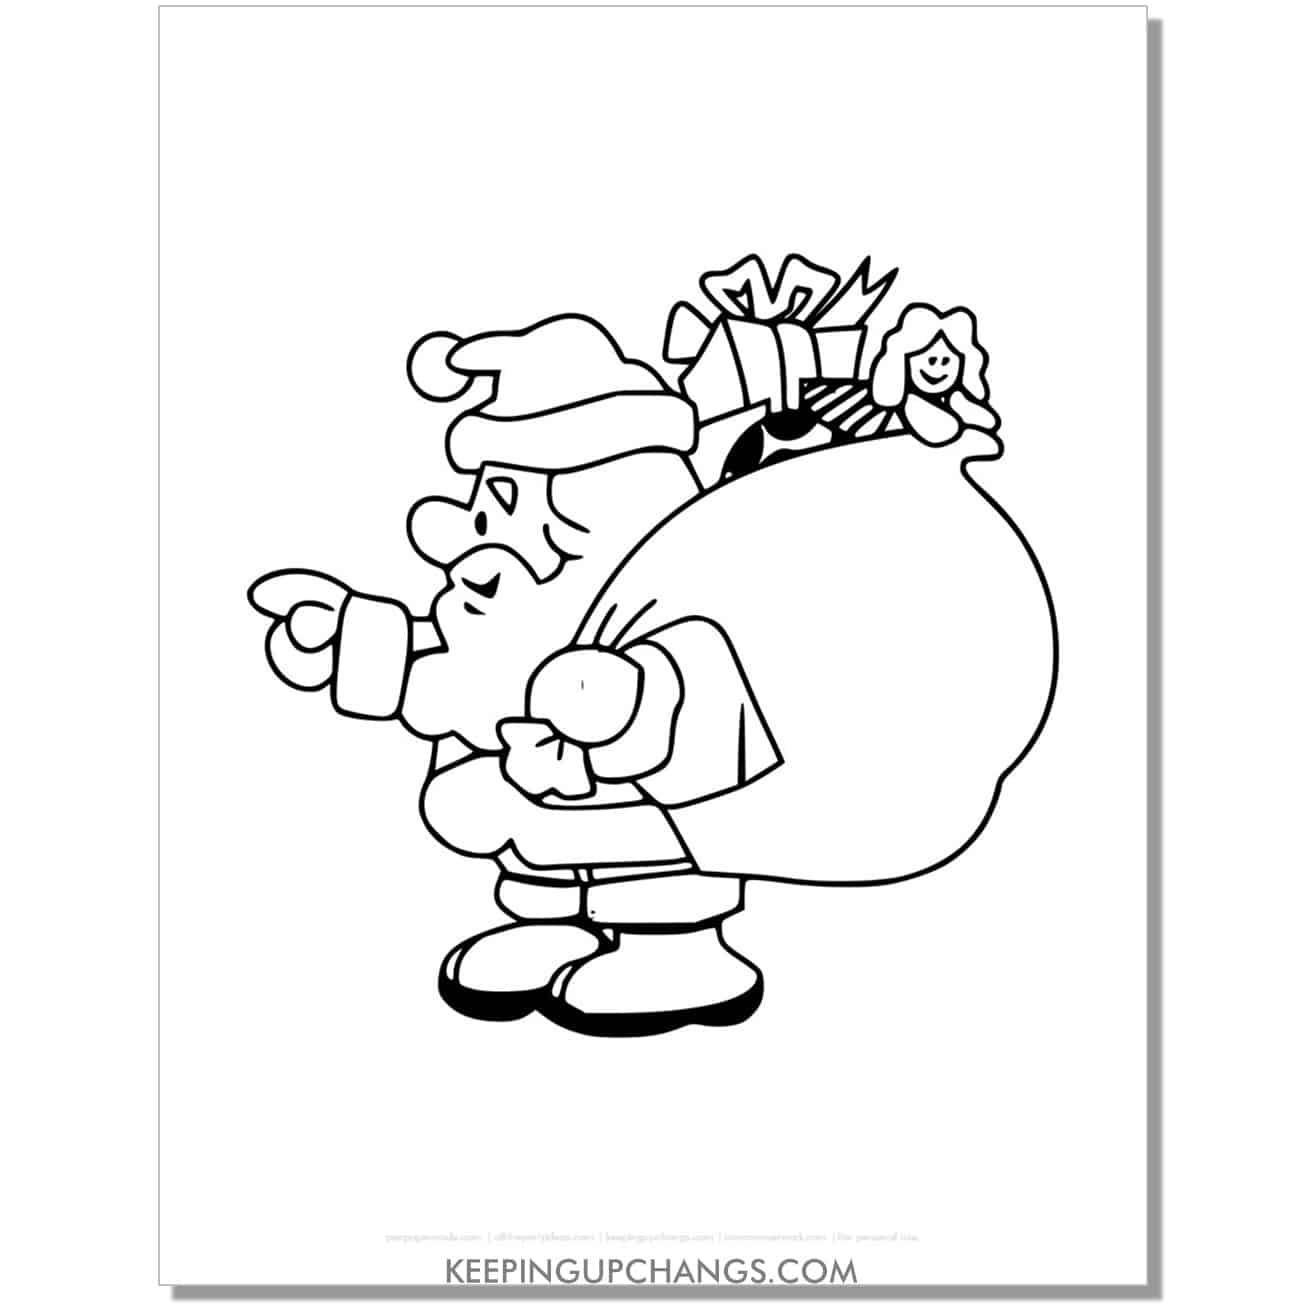 free santa with sack of toys outline, template, cut out, coloring page.